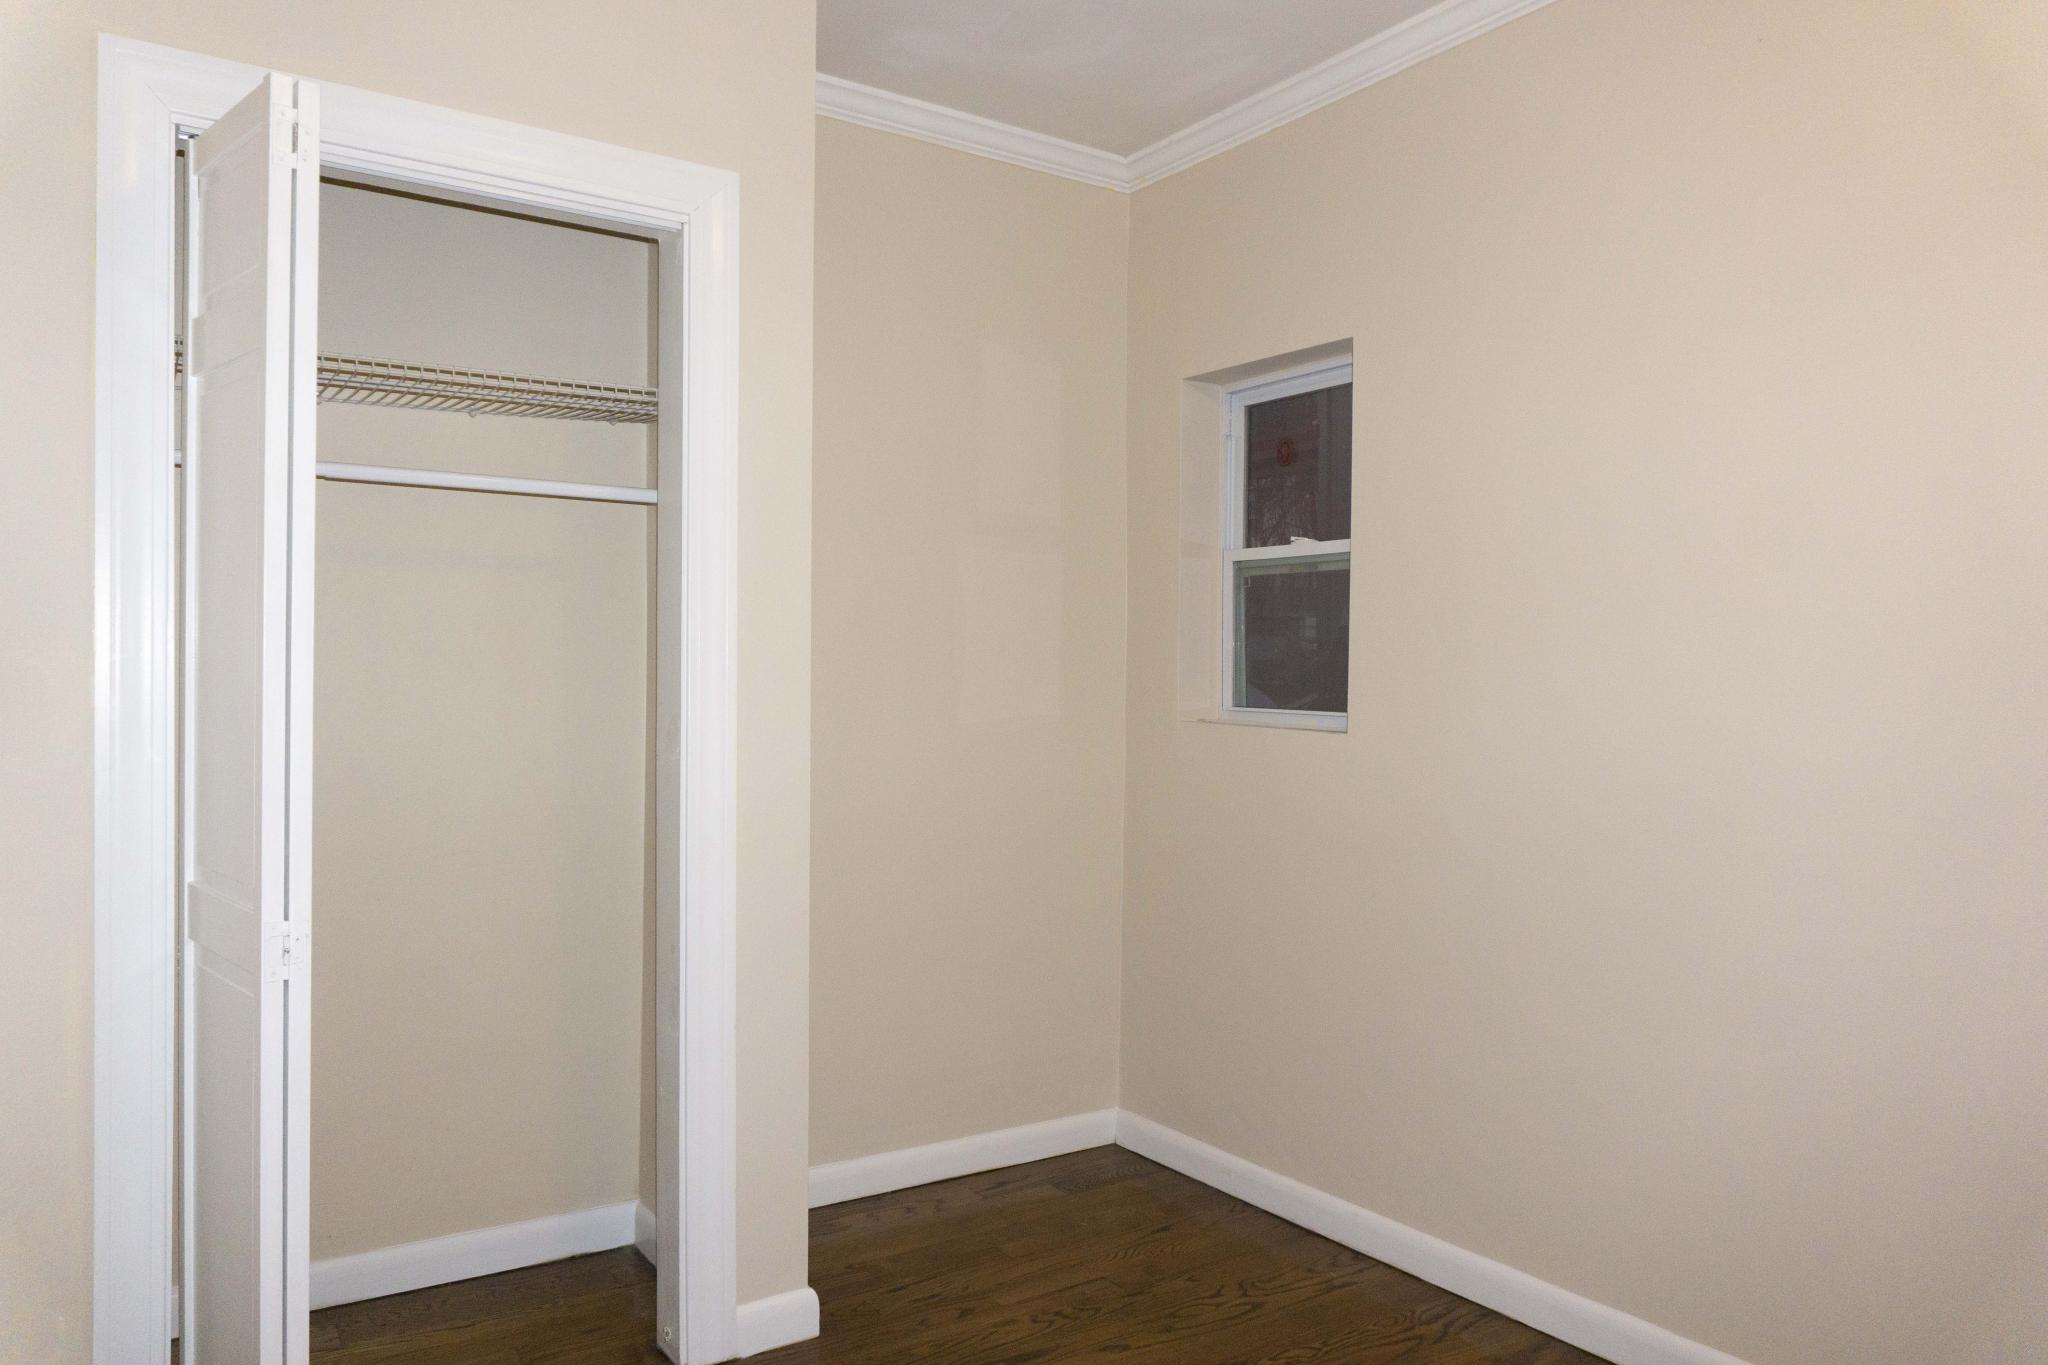 Photos of apartment on Elm St.,Watertown MA 02472